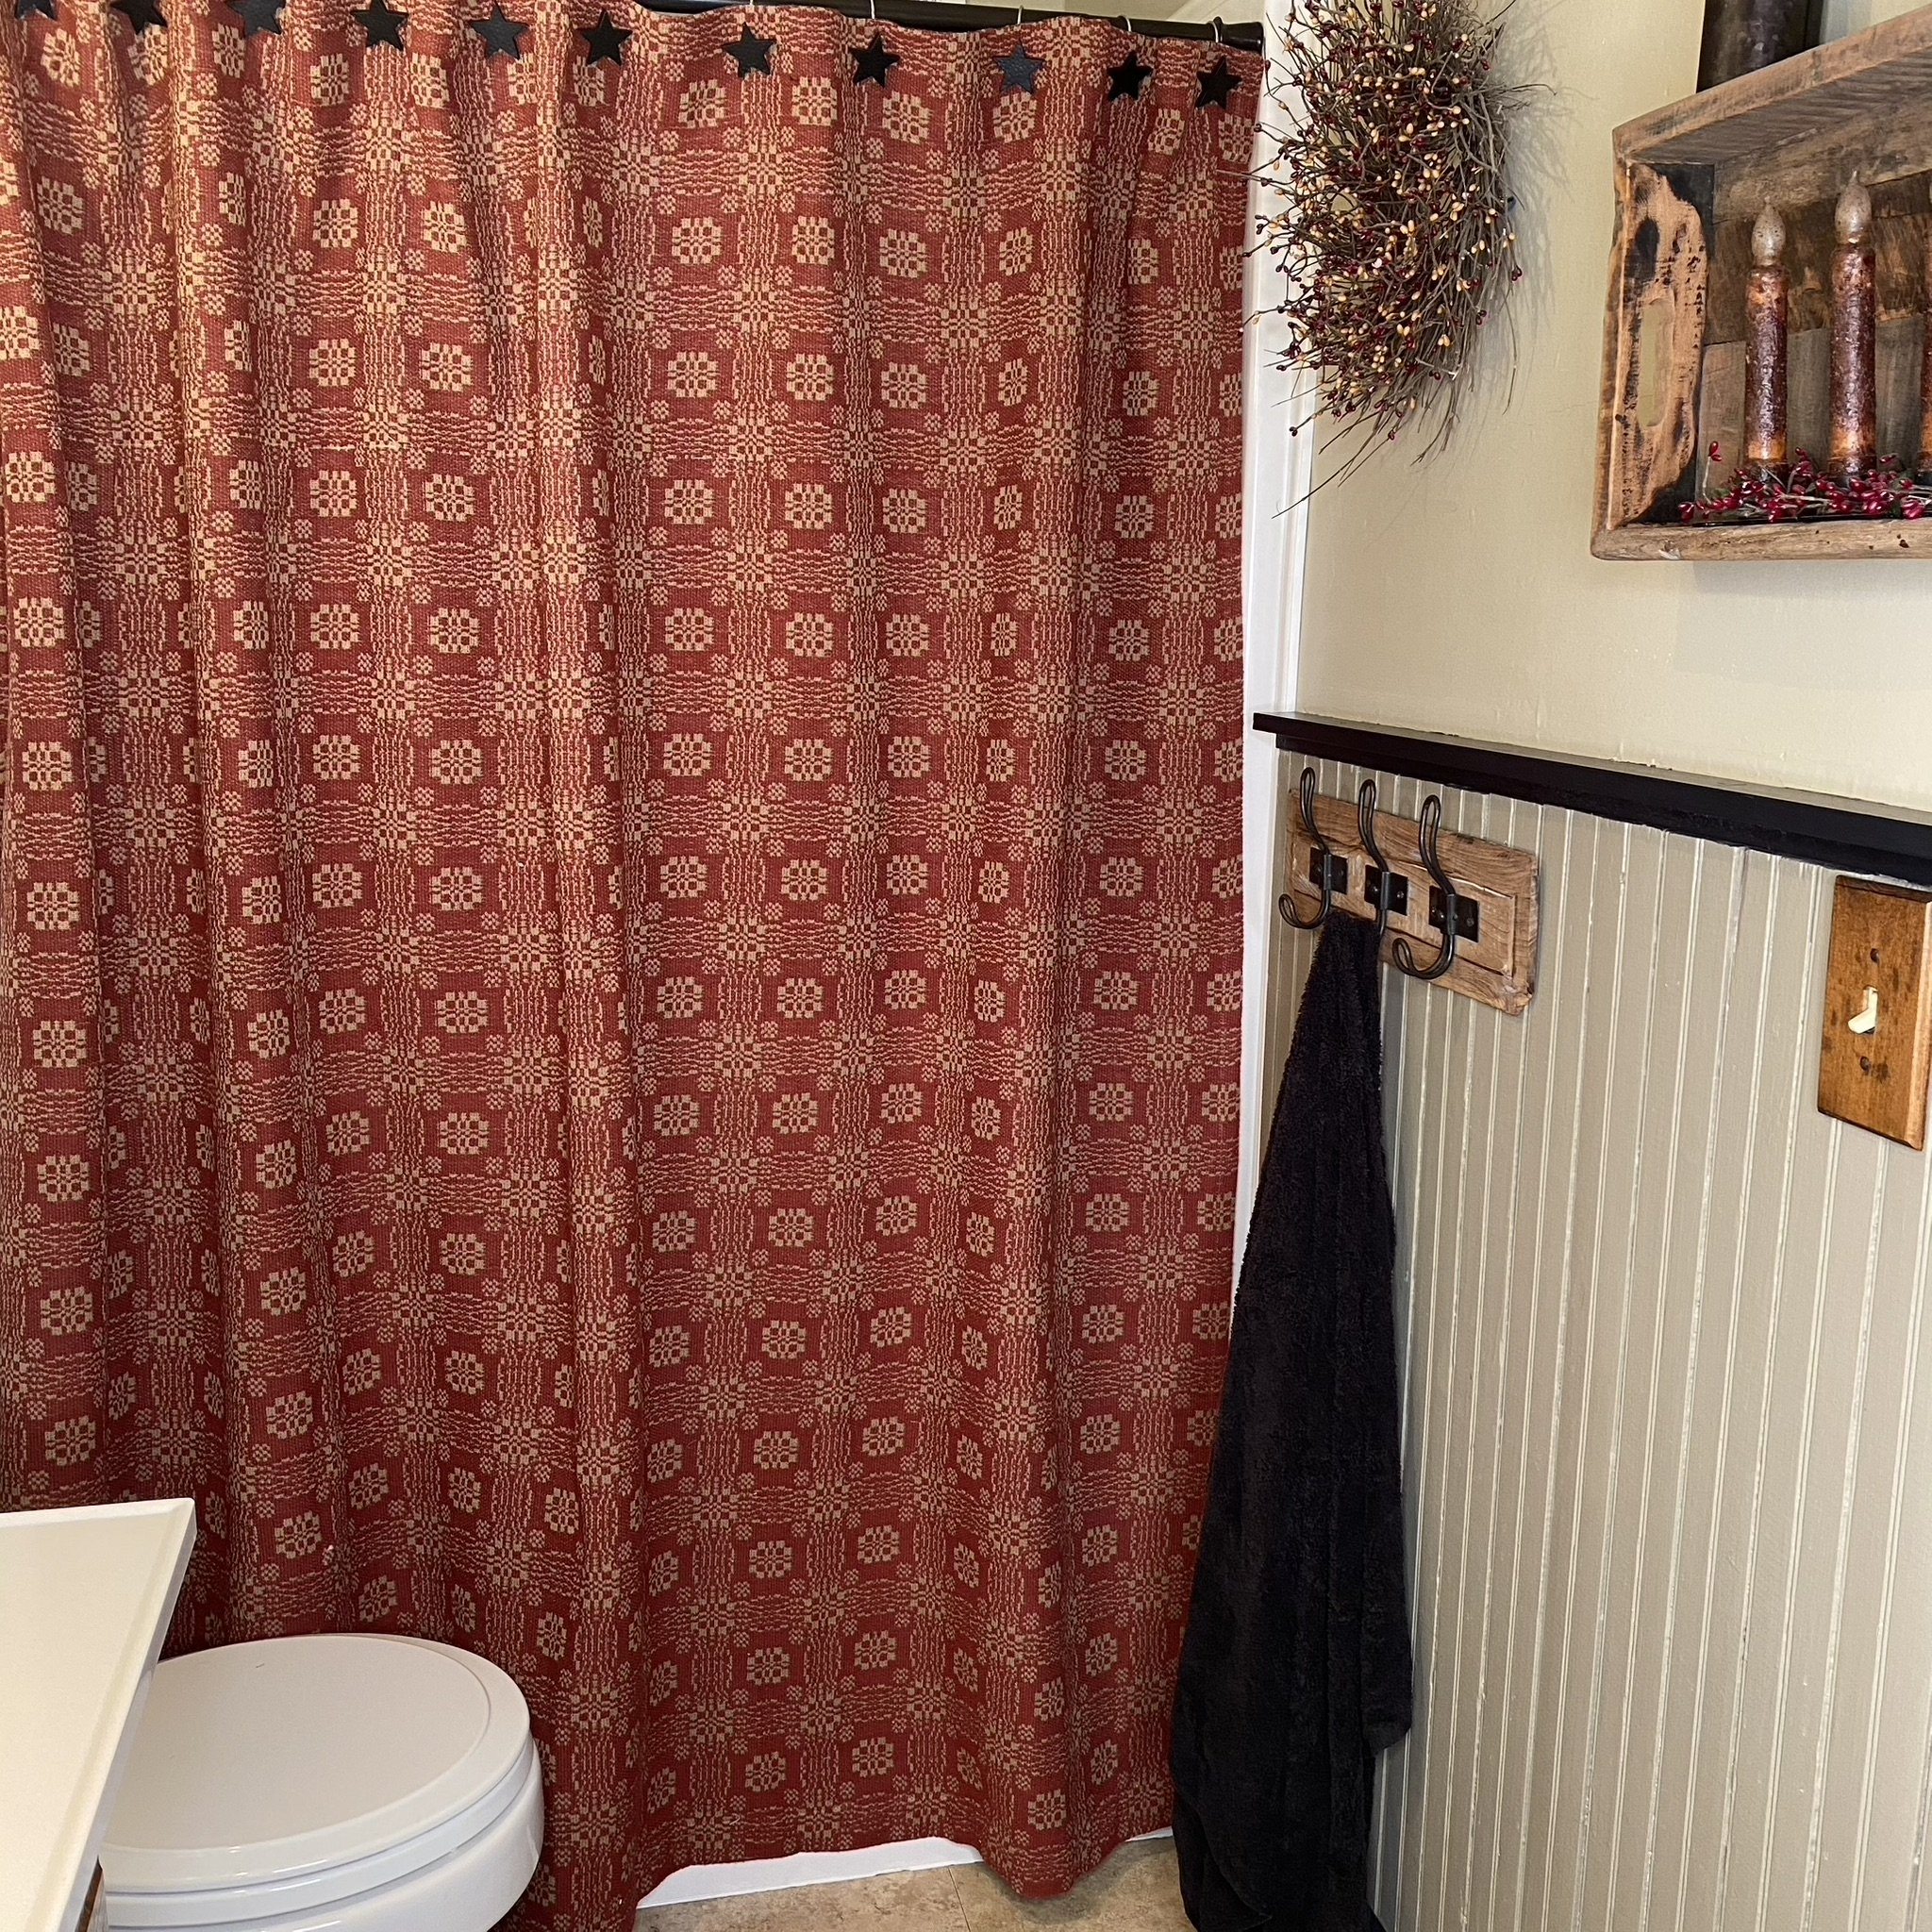 Gettysburg cranberry and tan woven shower curtain